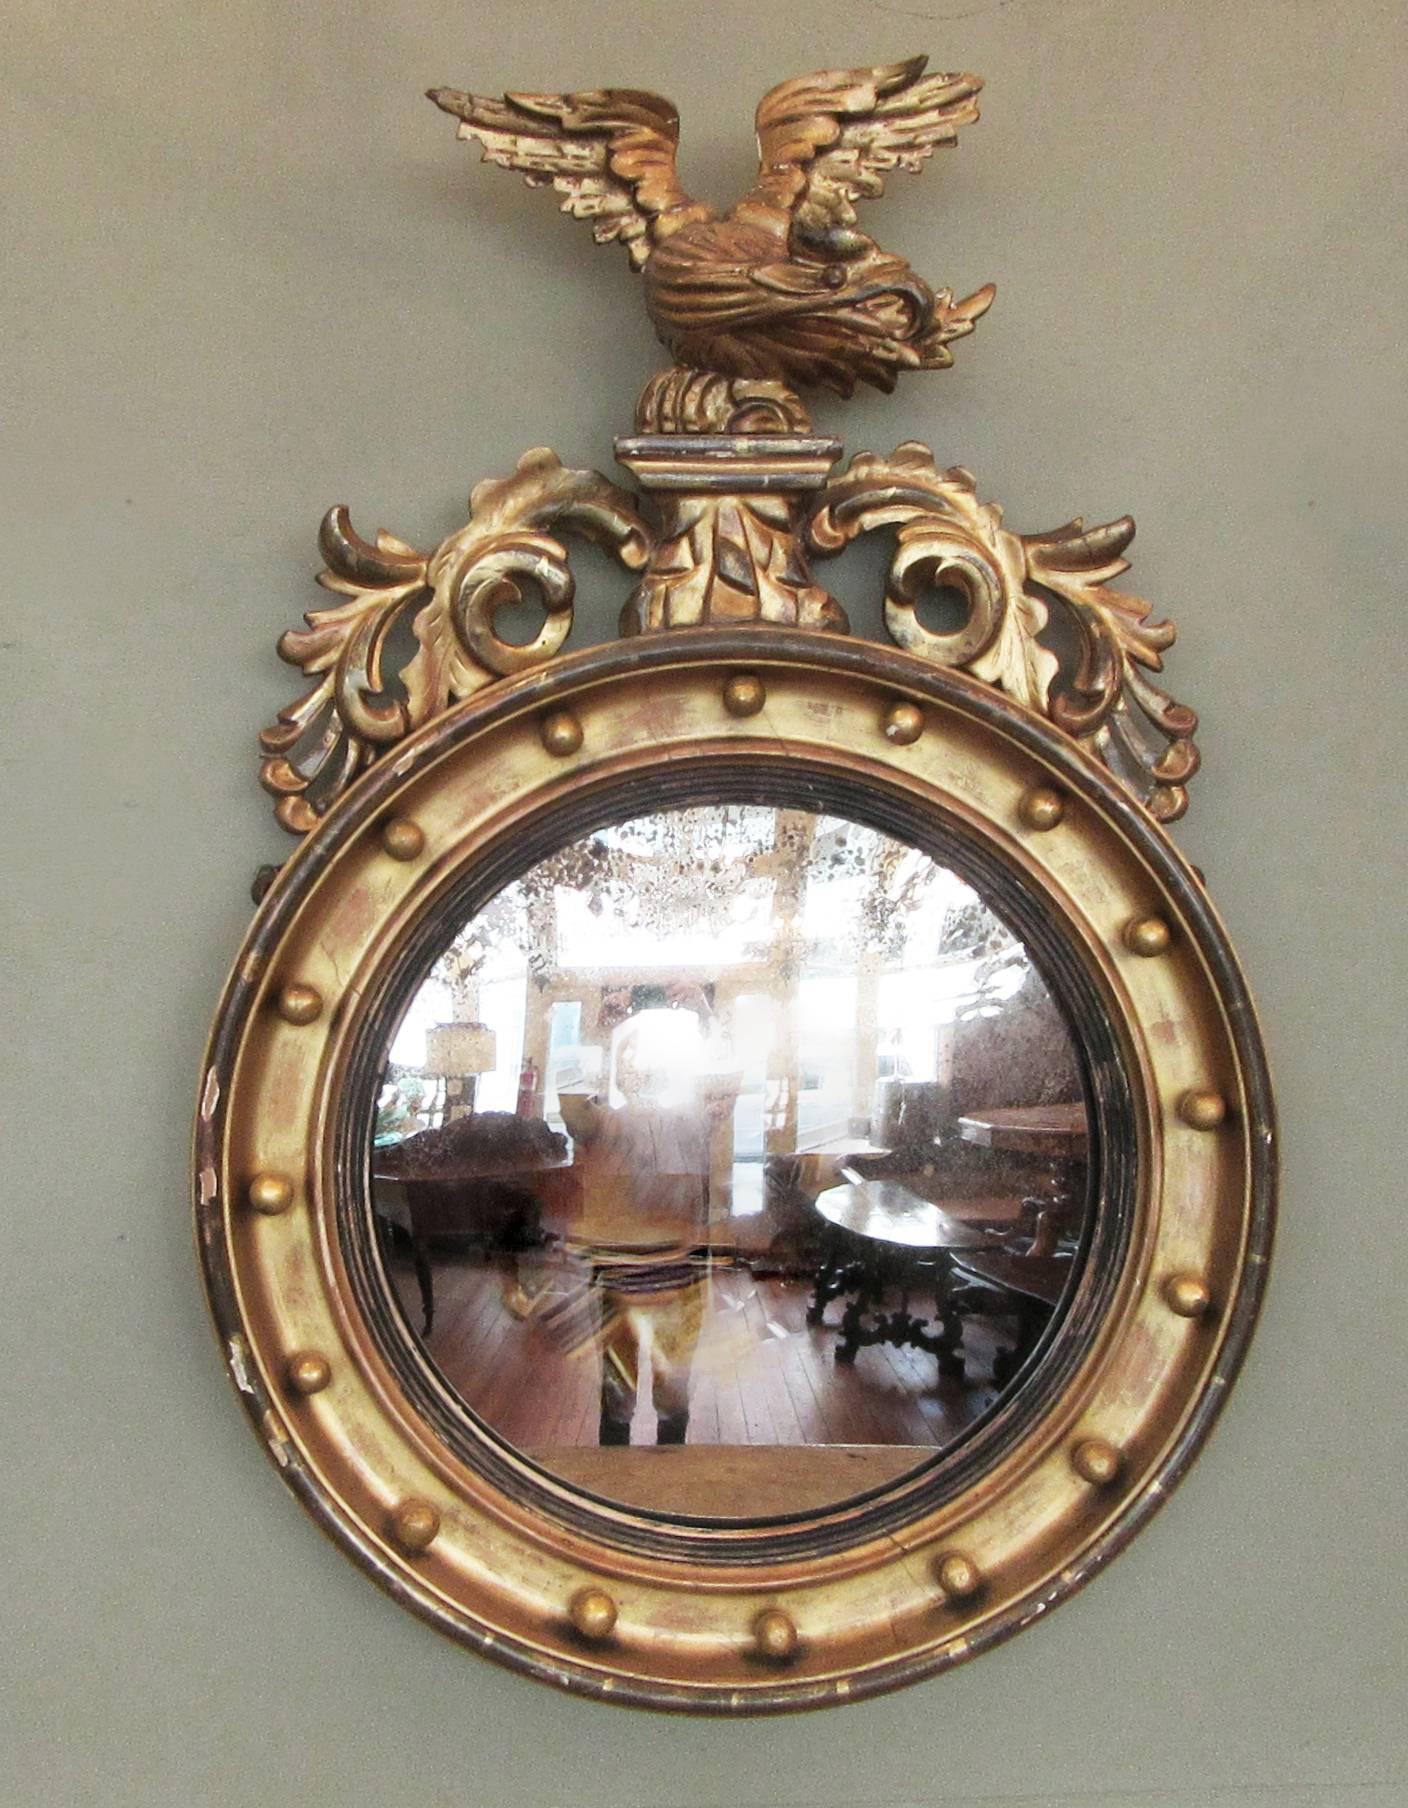 A classic English Regency convex mirror, circa 1840, made of carved giltwood and featuring a displayed eagle and acanthus leaves.